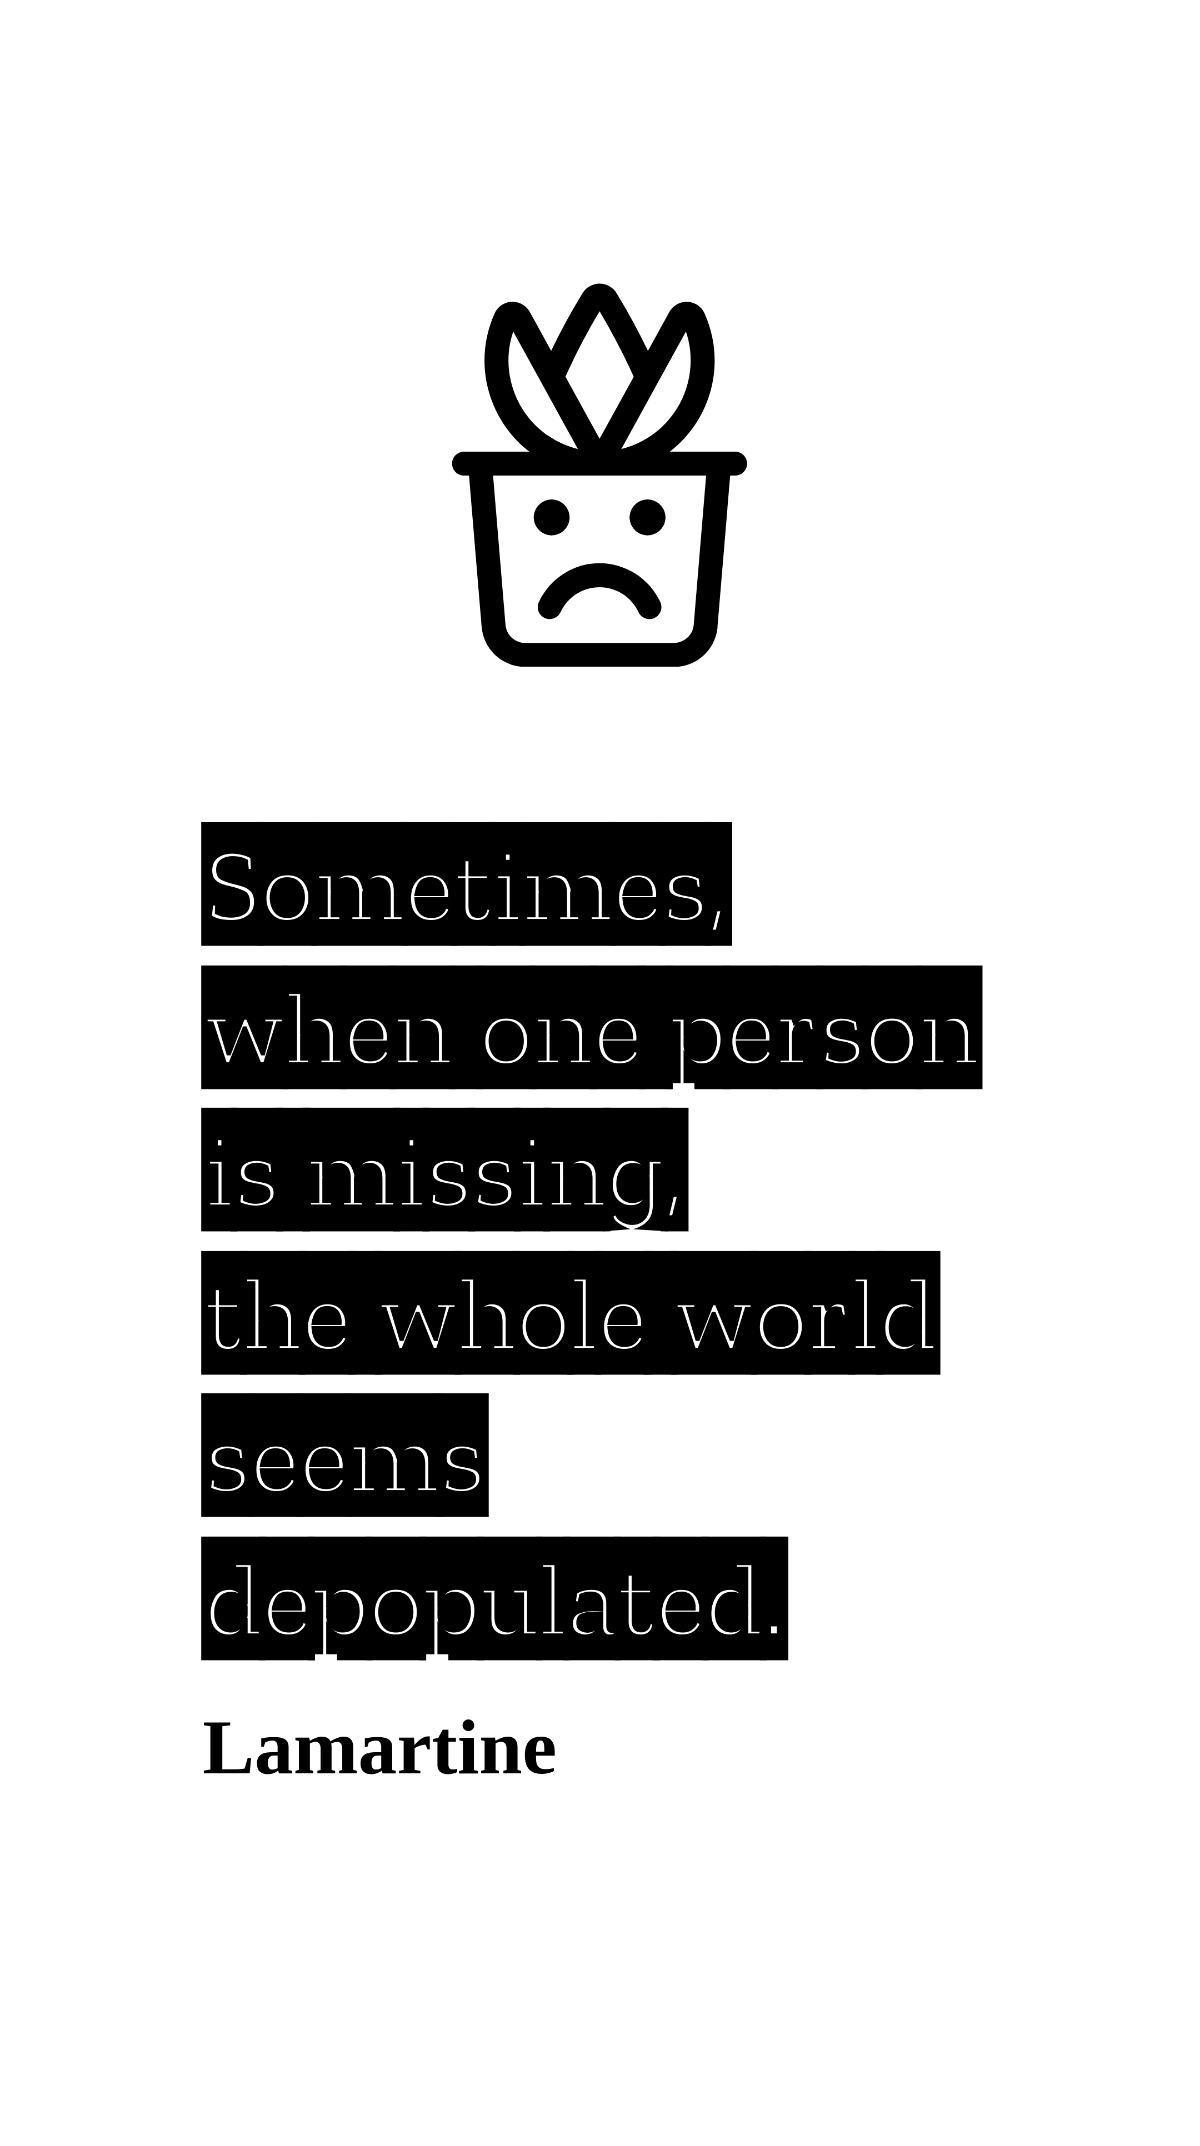 Lamartine - Sometimes, when one person is missing, the whole world seems depopulated.